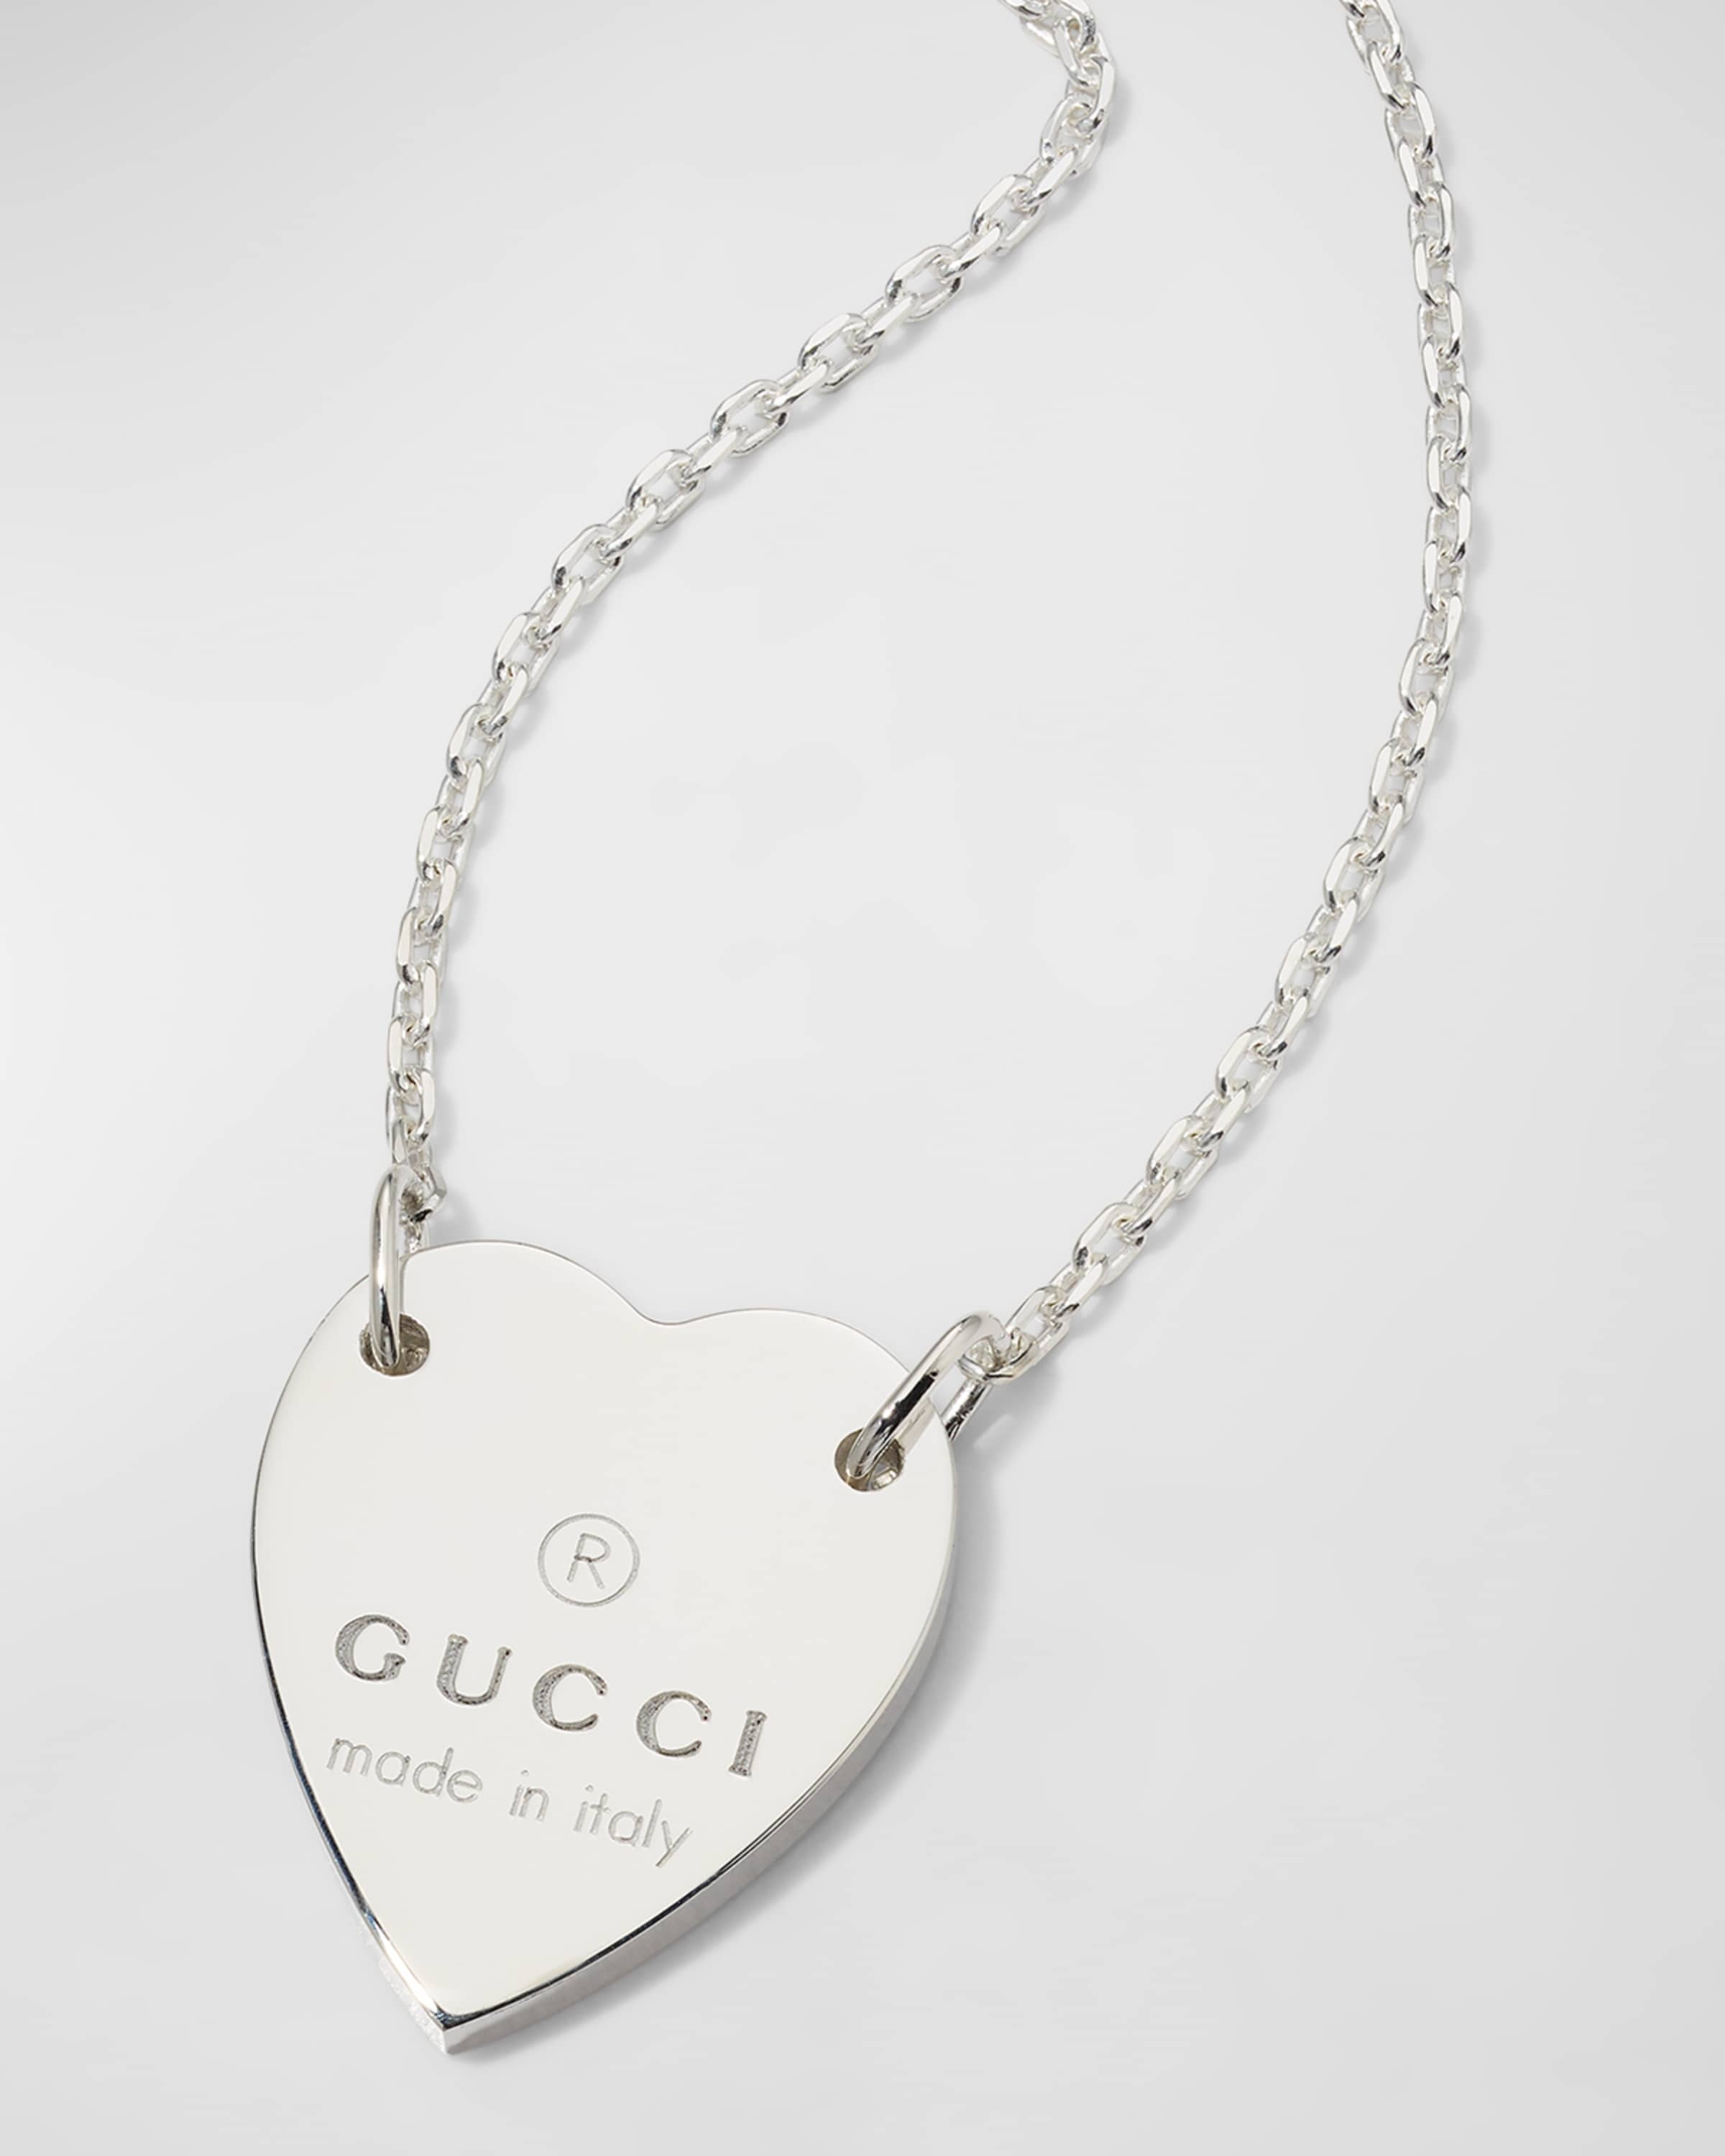 Engraved Heart Trademark Necklace - 5